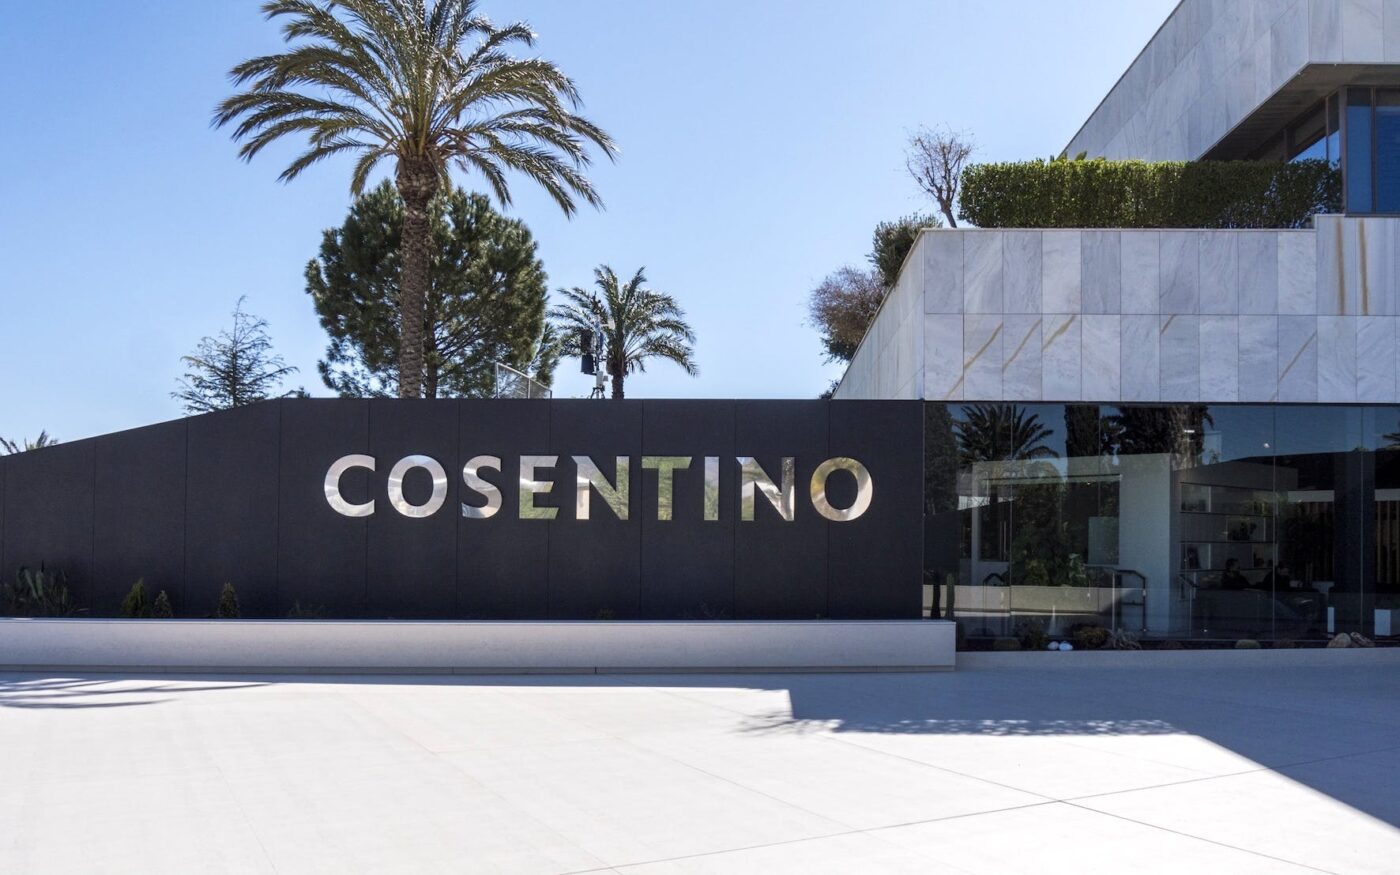 Cosentino recognizes its employees with a special bonus